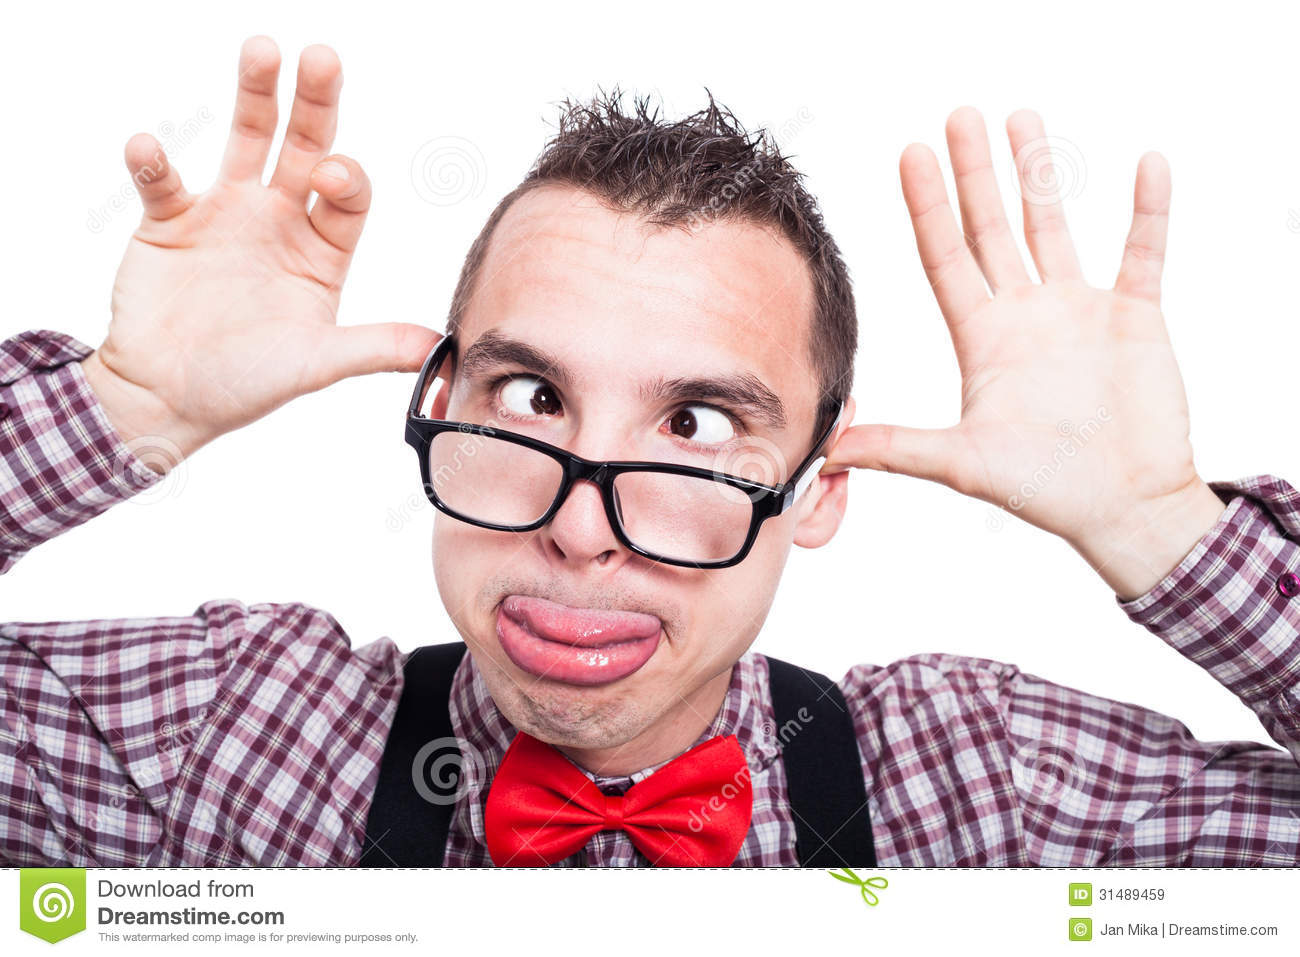 Funny Cross Eyed Nerd Face Royalty Free Stock Images   Image  31489459